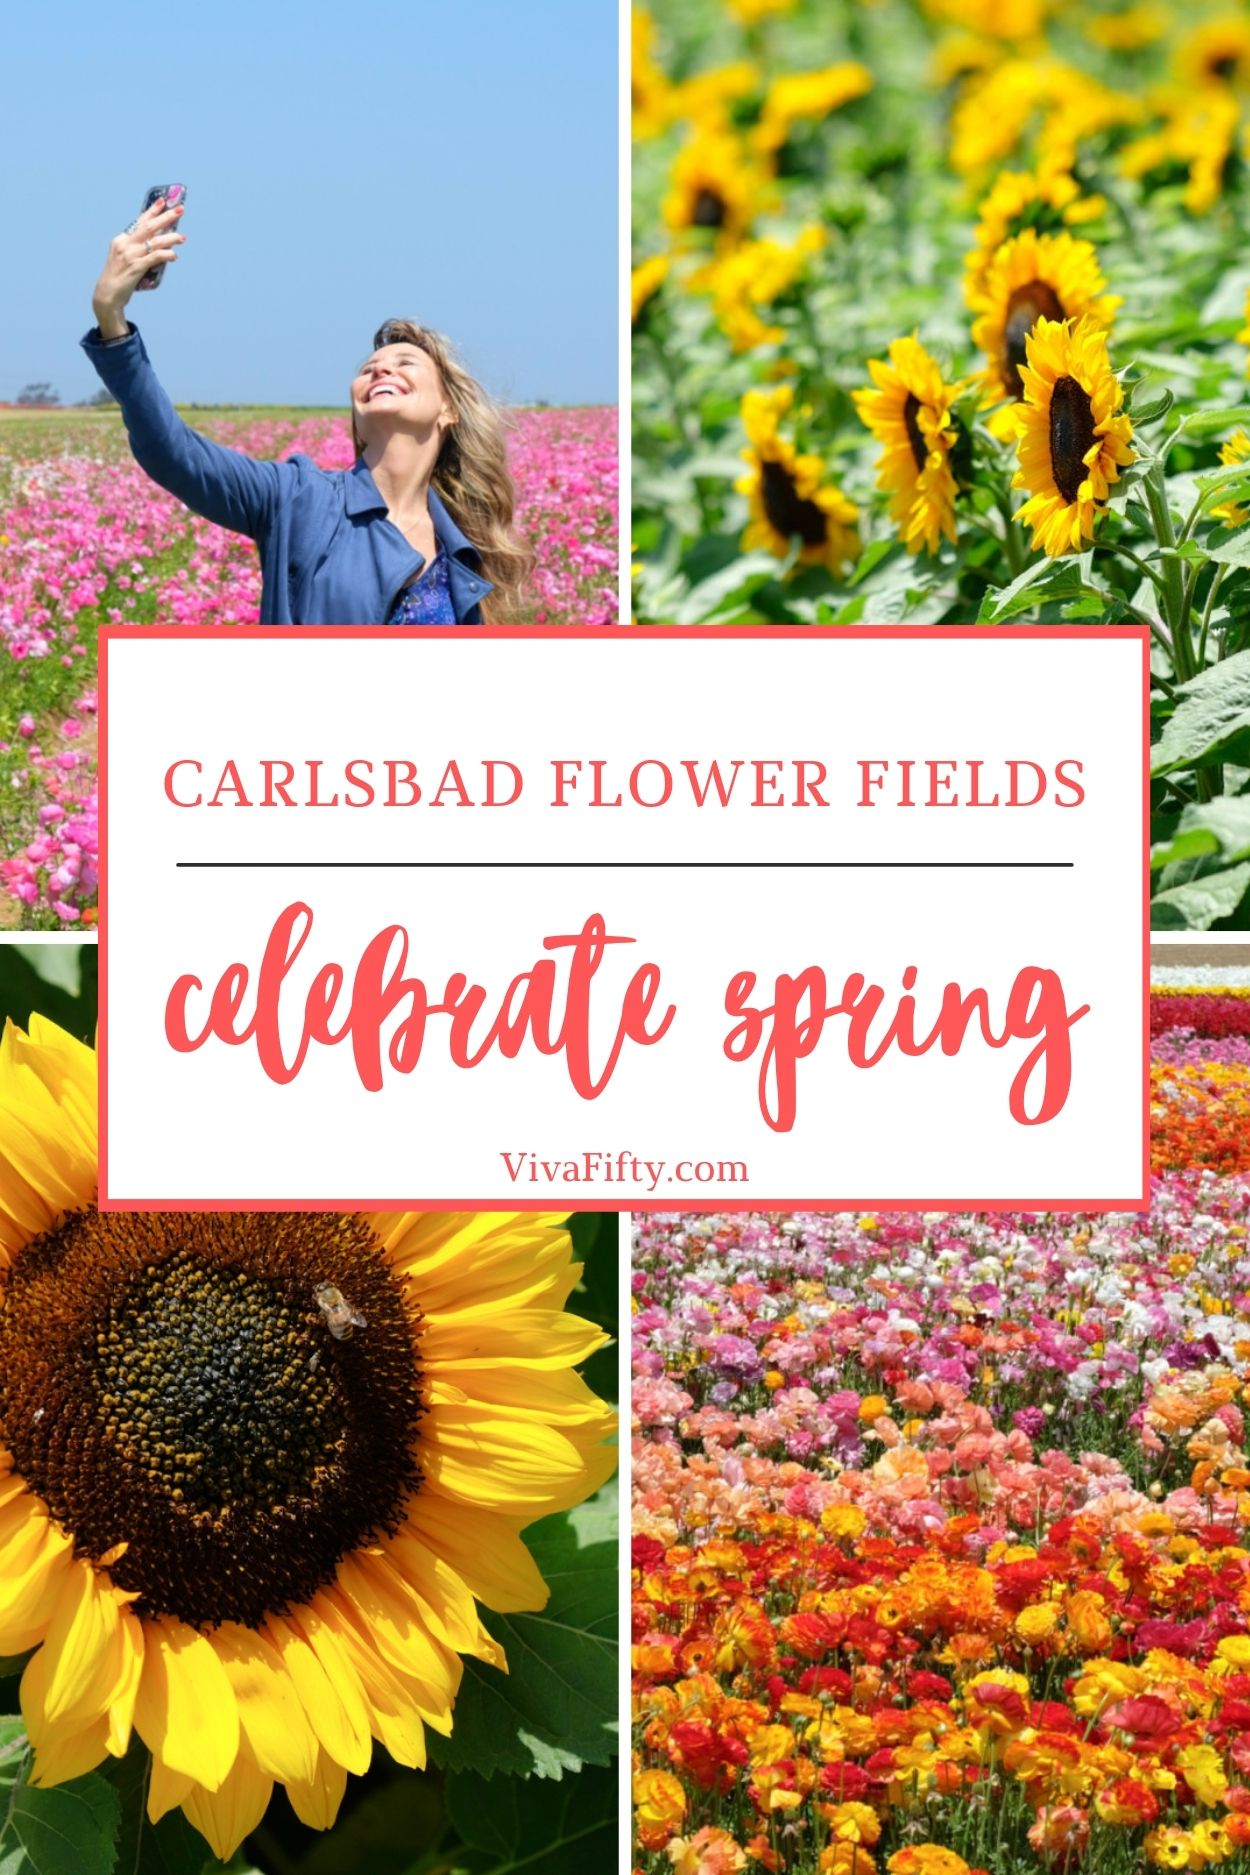 The Carlsbad Flower Fields celebrate spring with blooming flowers, live music, and family-friendly activities.